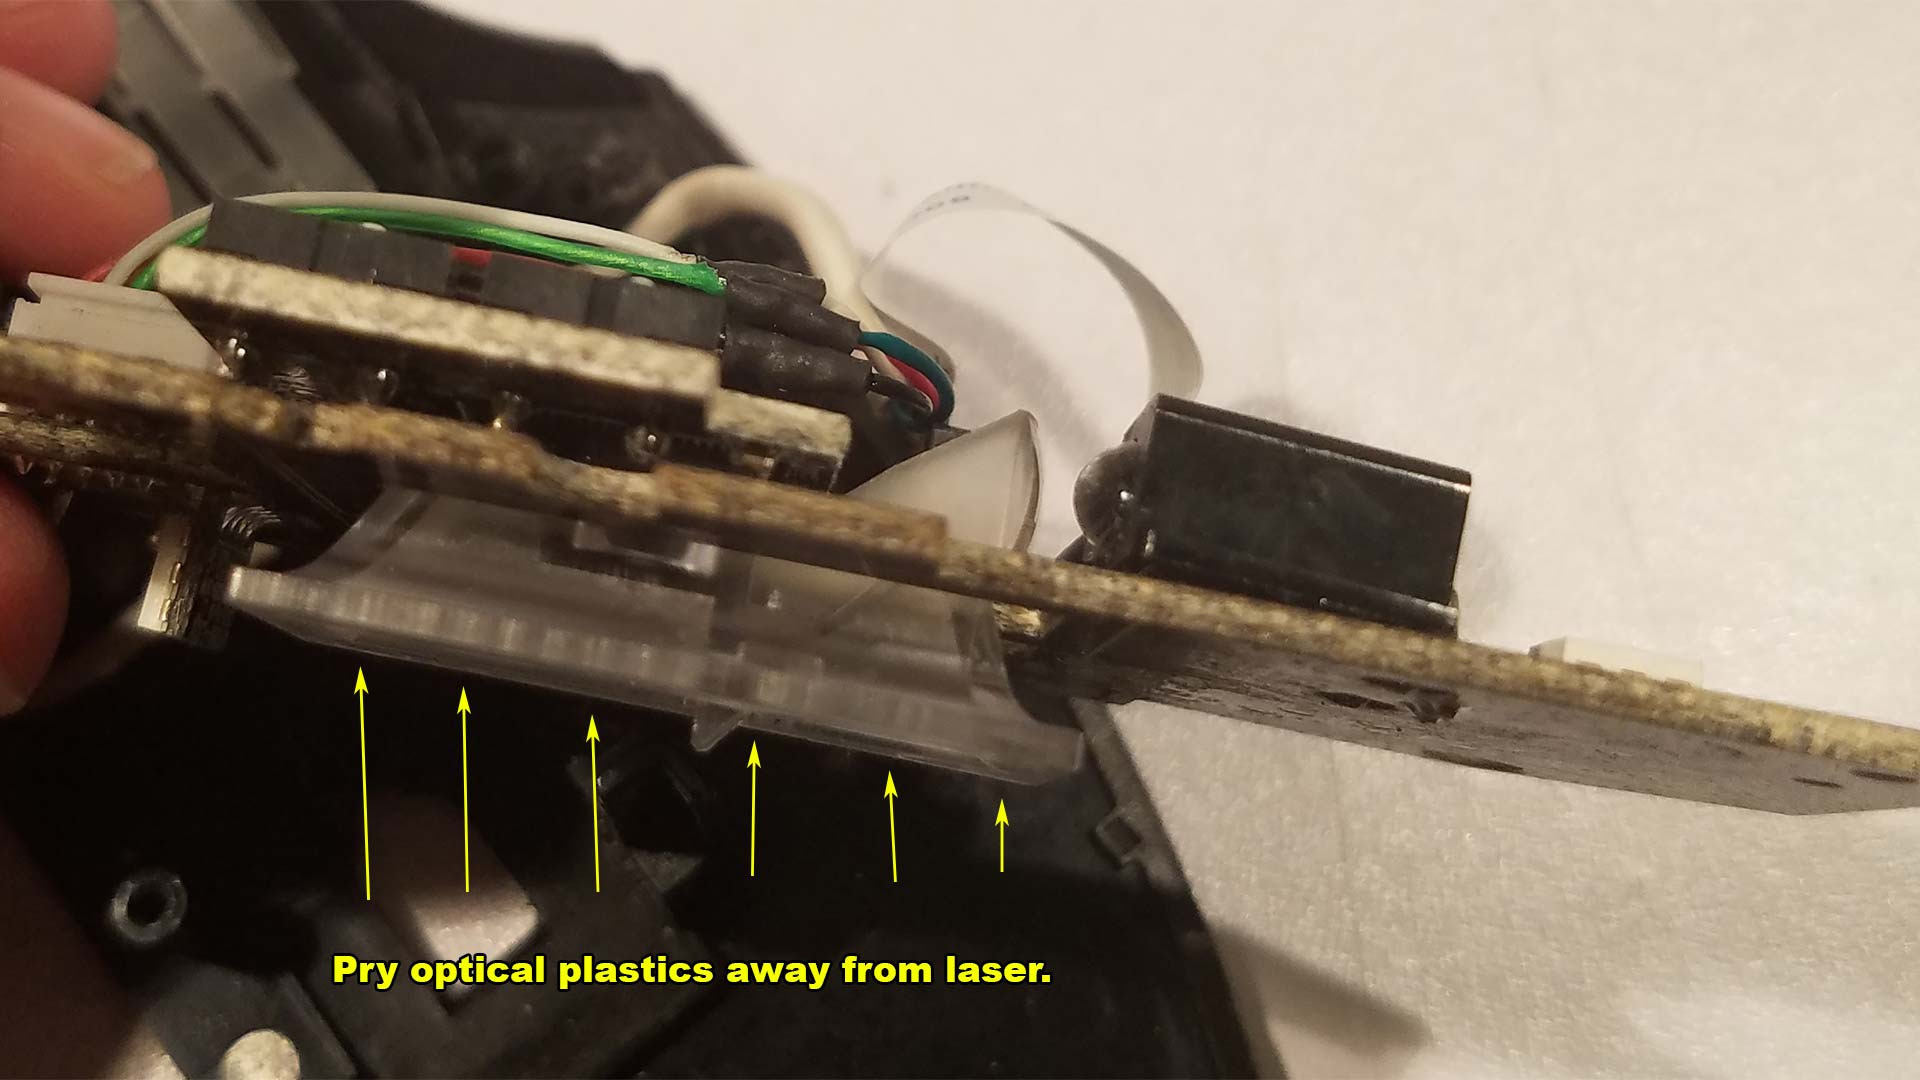 Remove optical plastics from laser assembly.